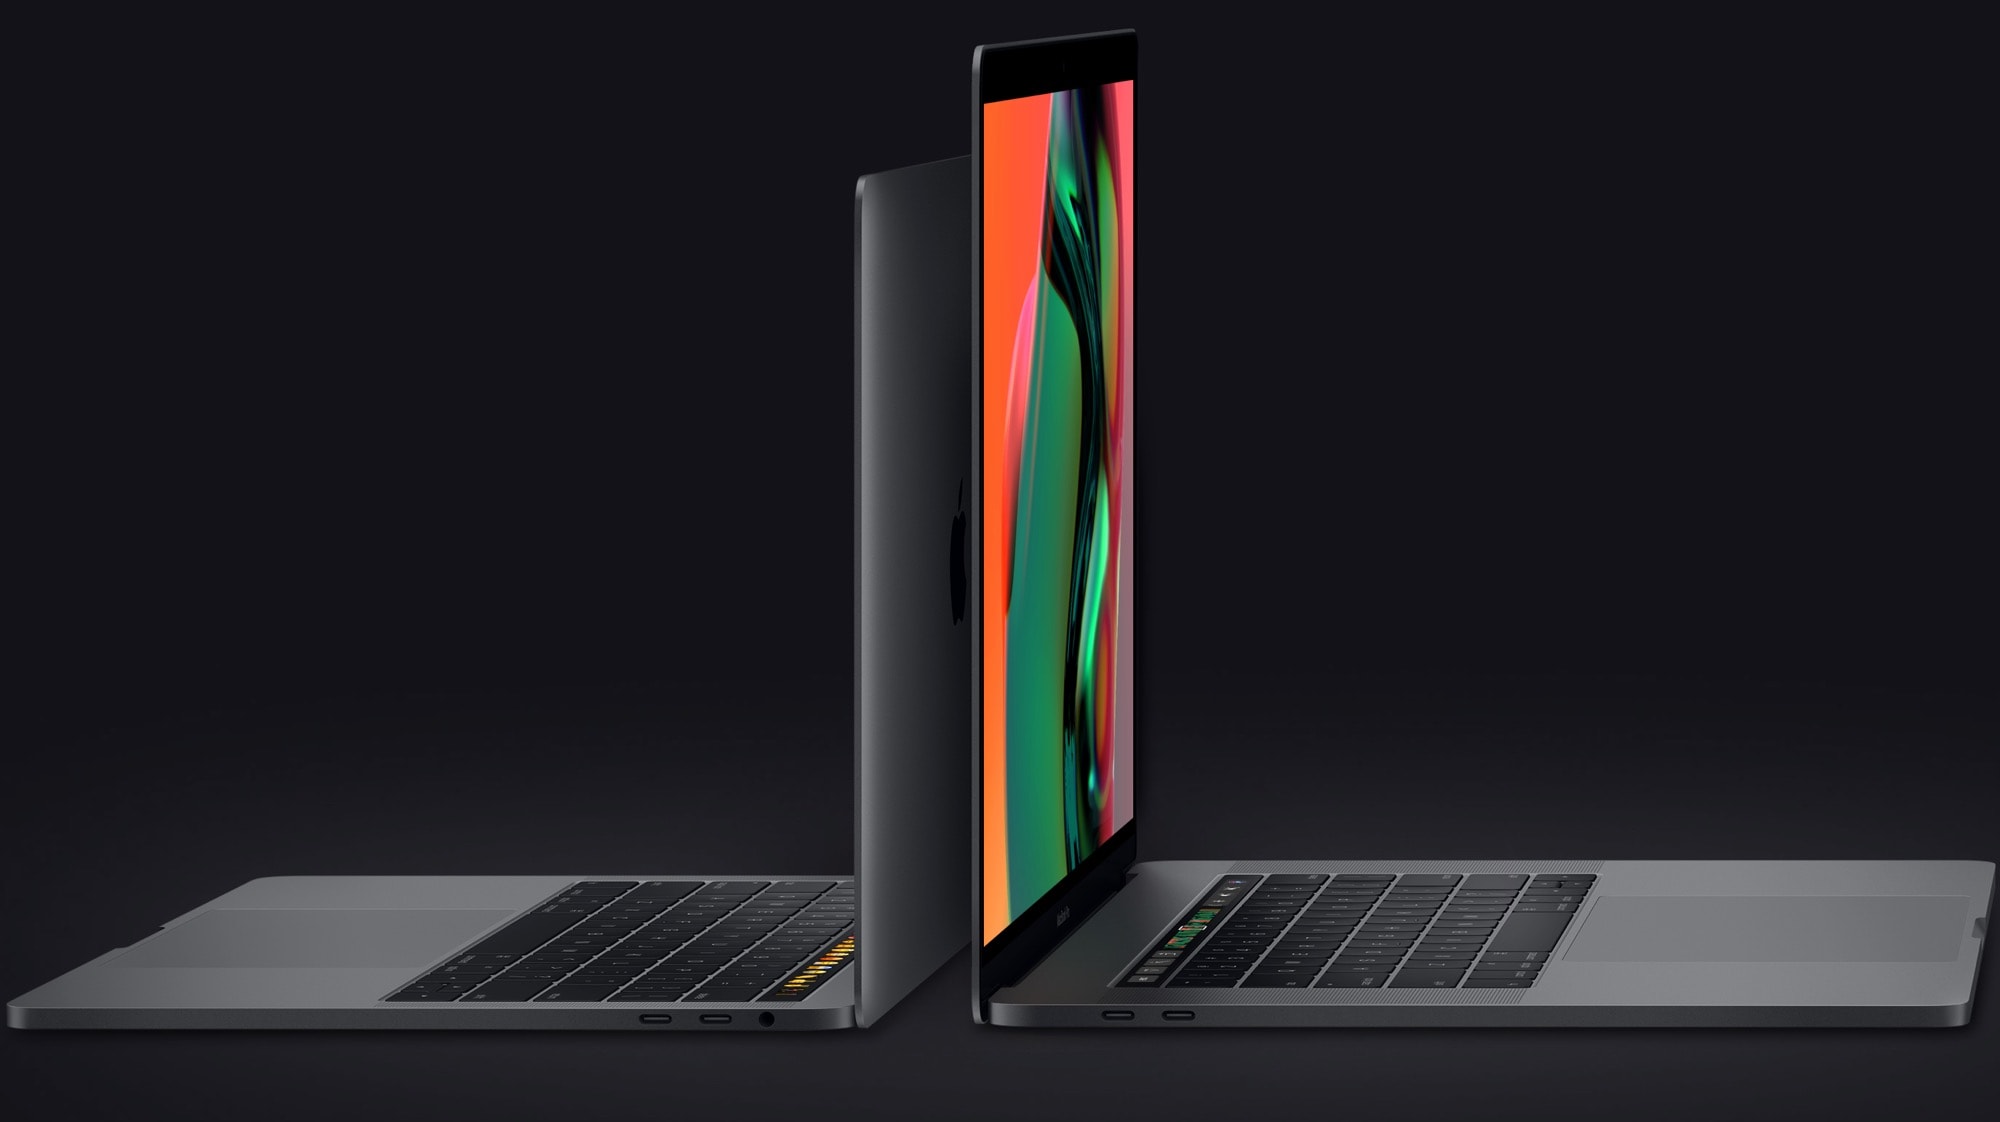 The MacBook Pro has a Touch Bar, and a better display.